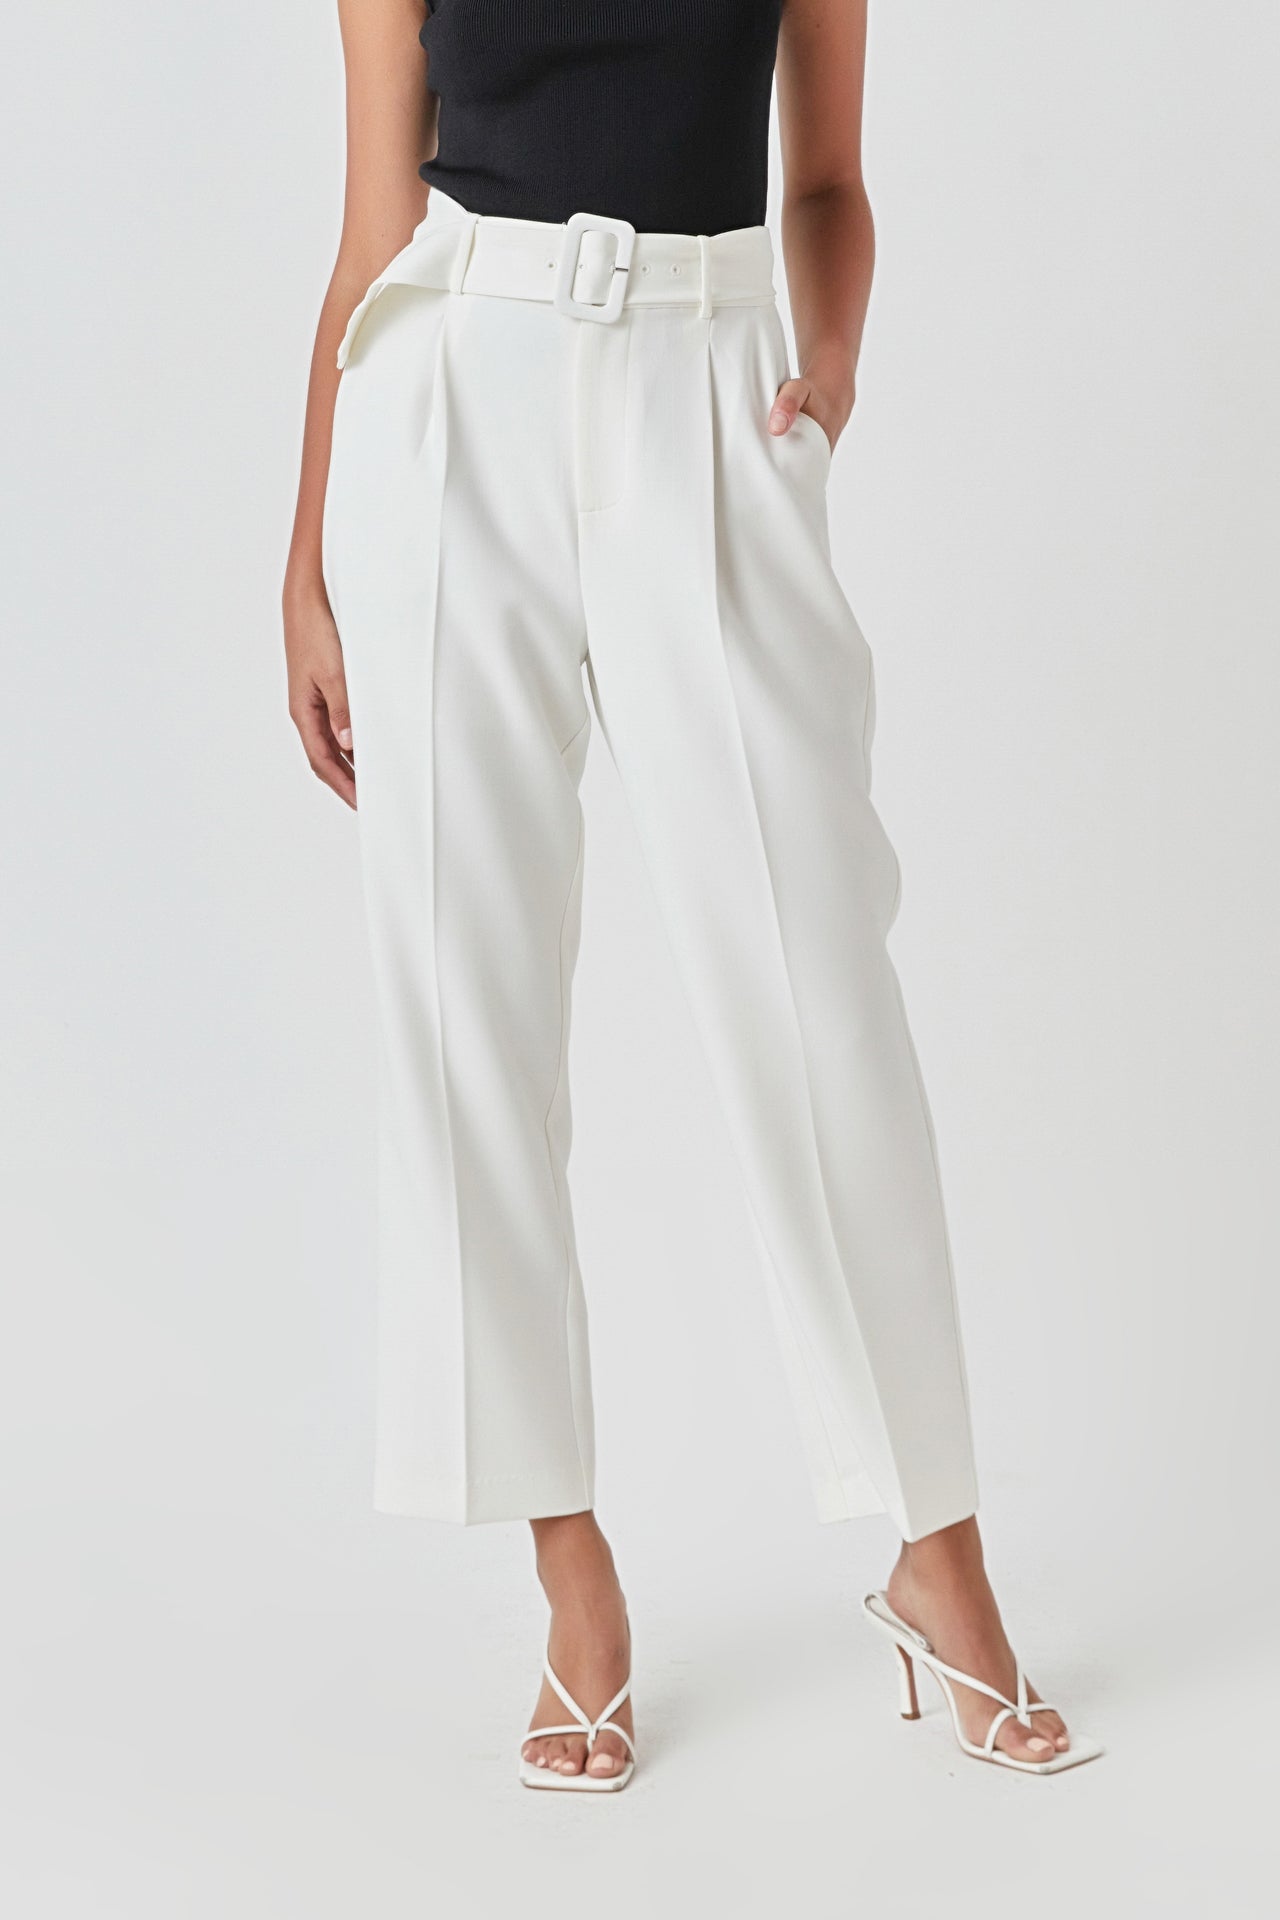 ENDLESS ROSE - High Waisted Trousers - PANTS available at Objectrare